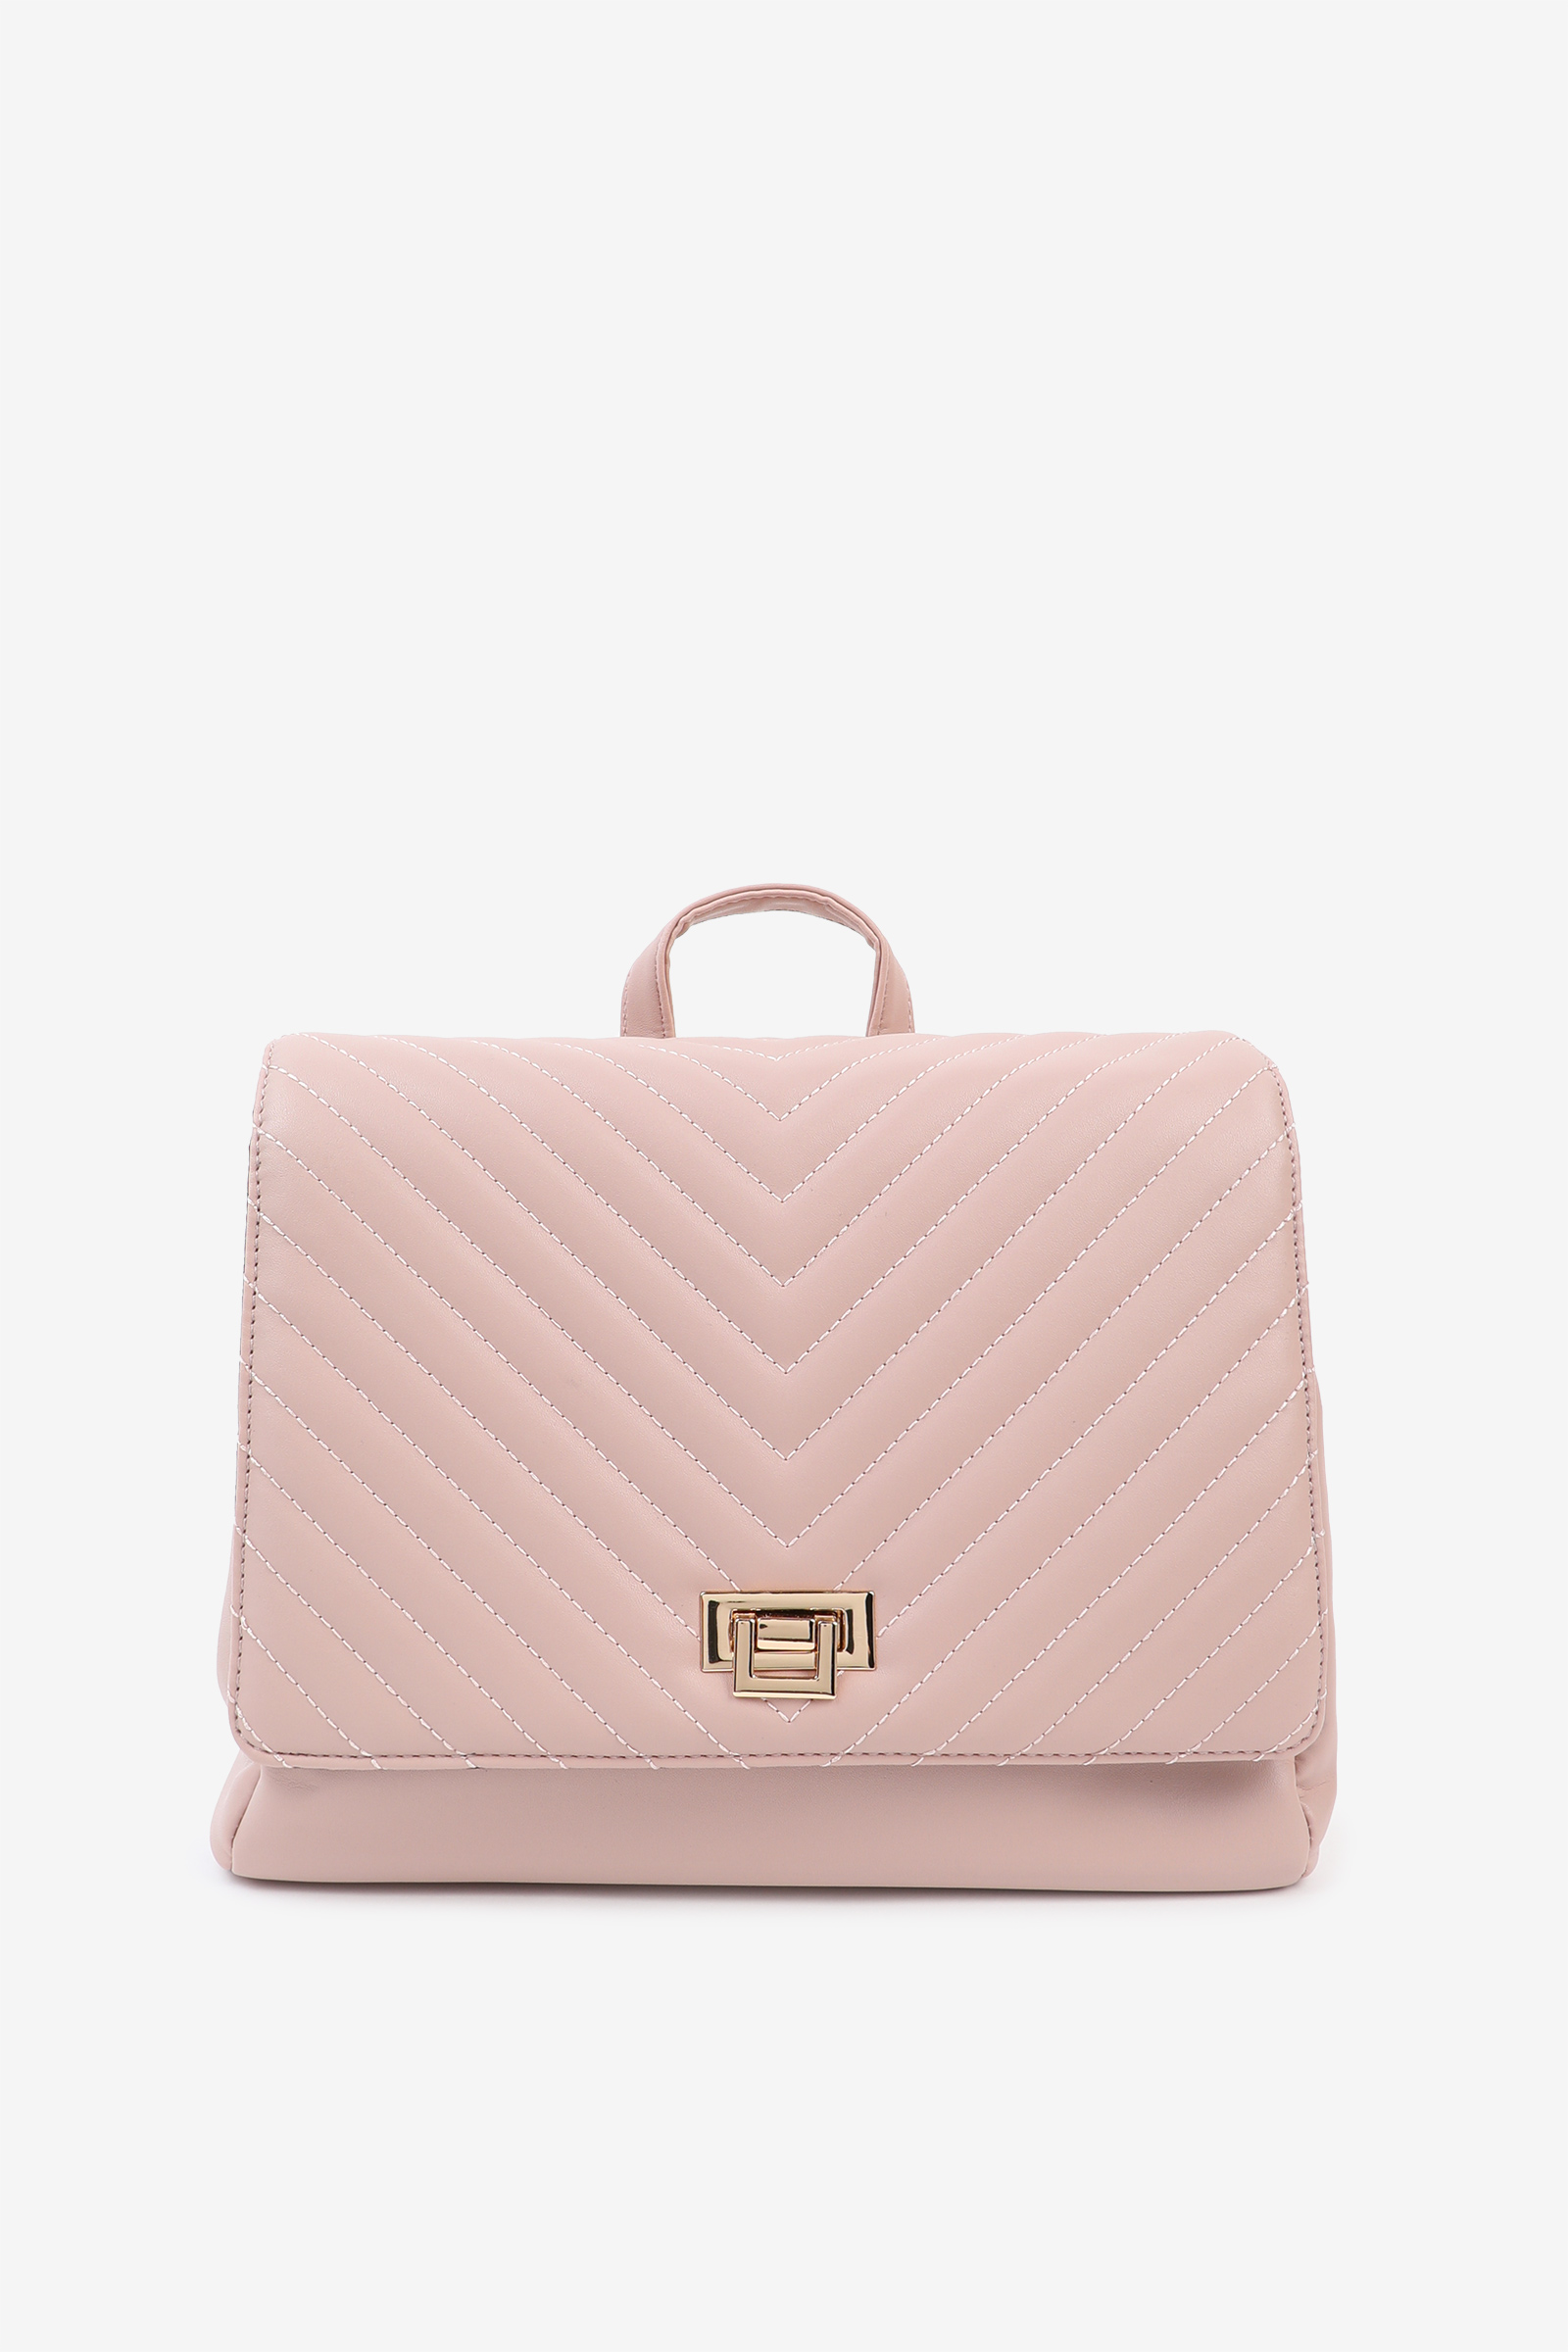 Ardene Convertible Topstitched Chevron Backpack in Light Pink | Faux Leather/Polyester